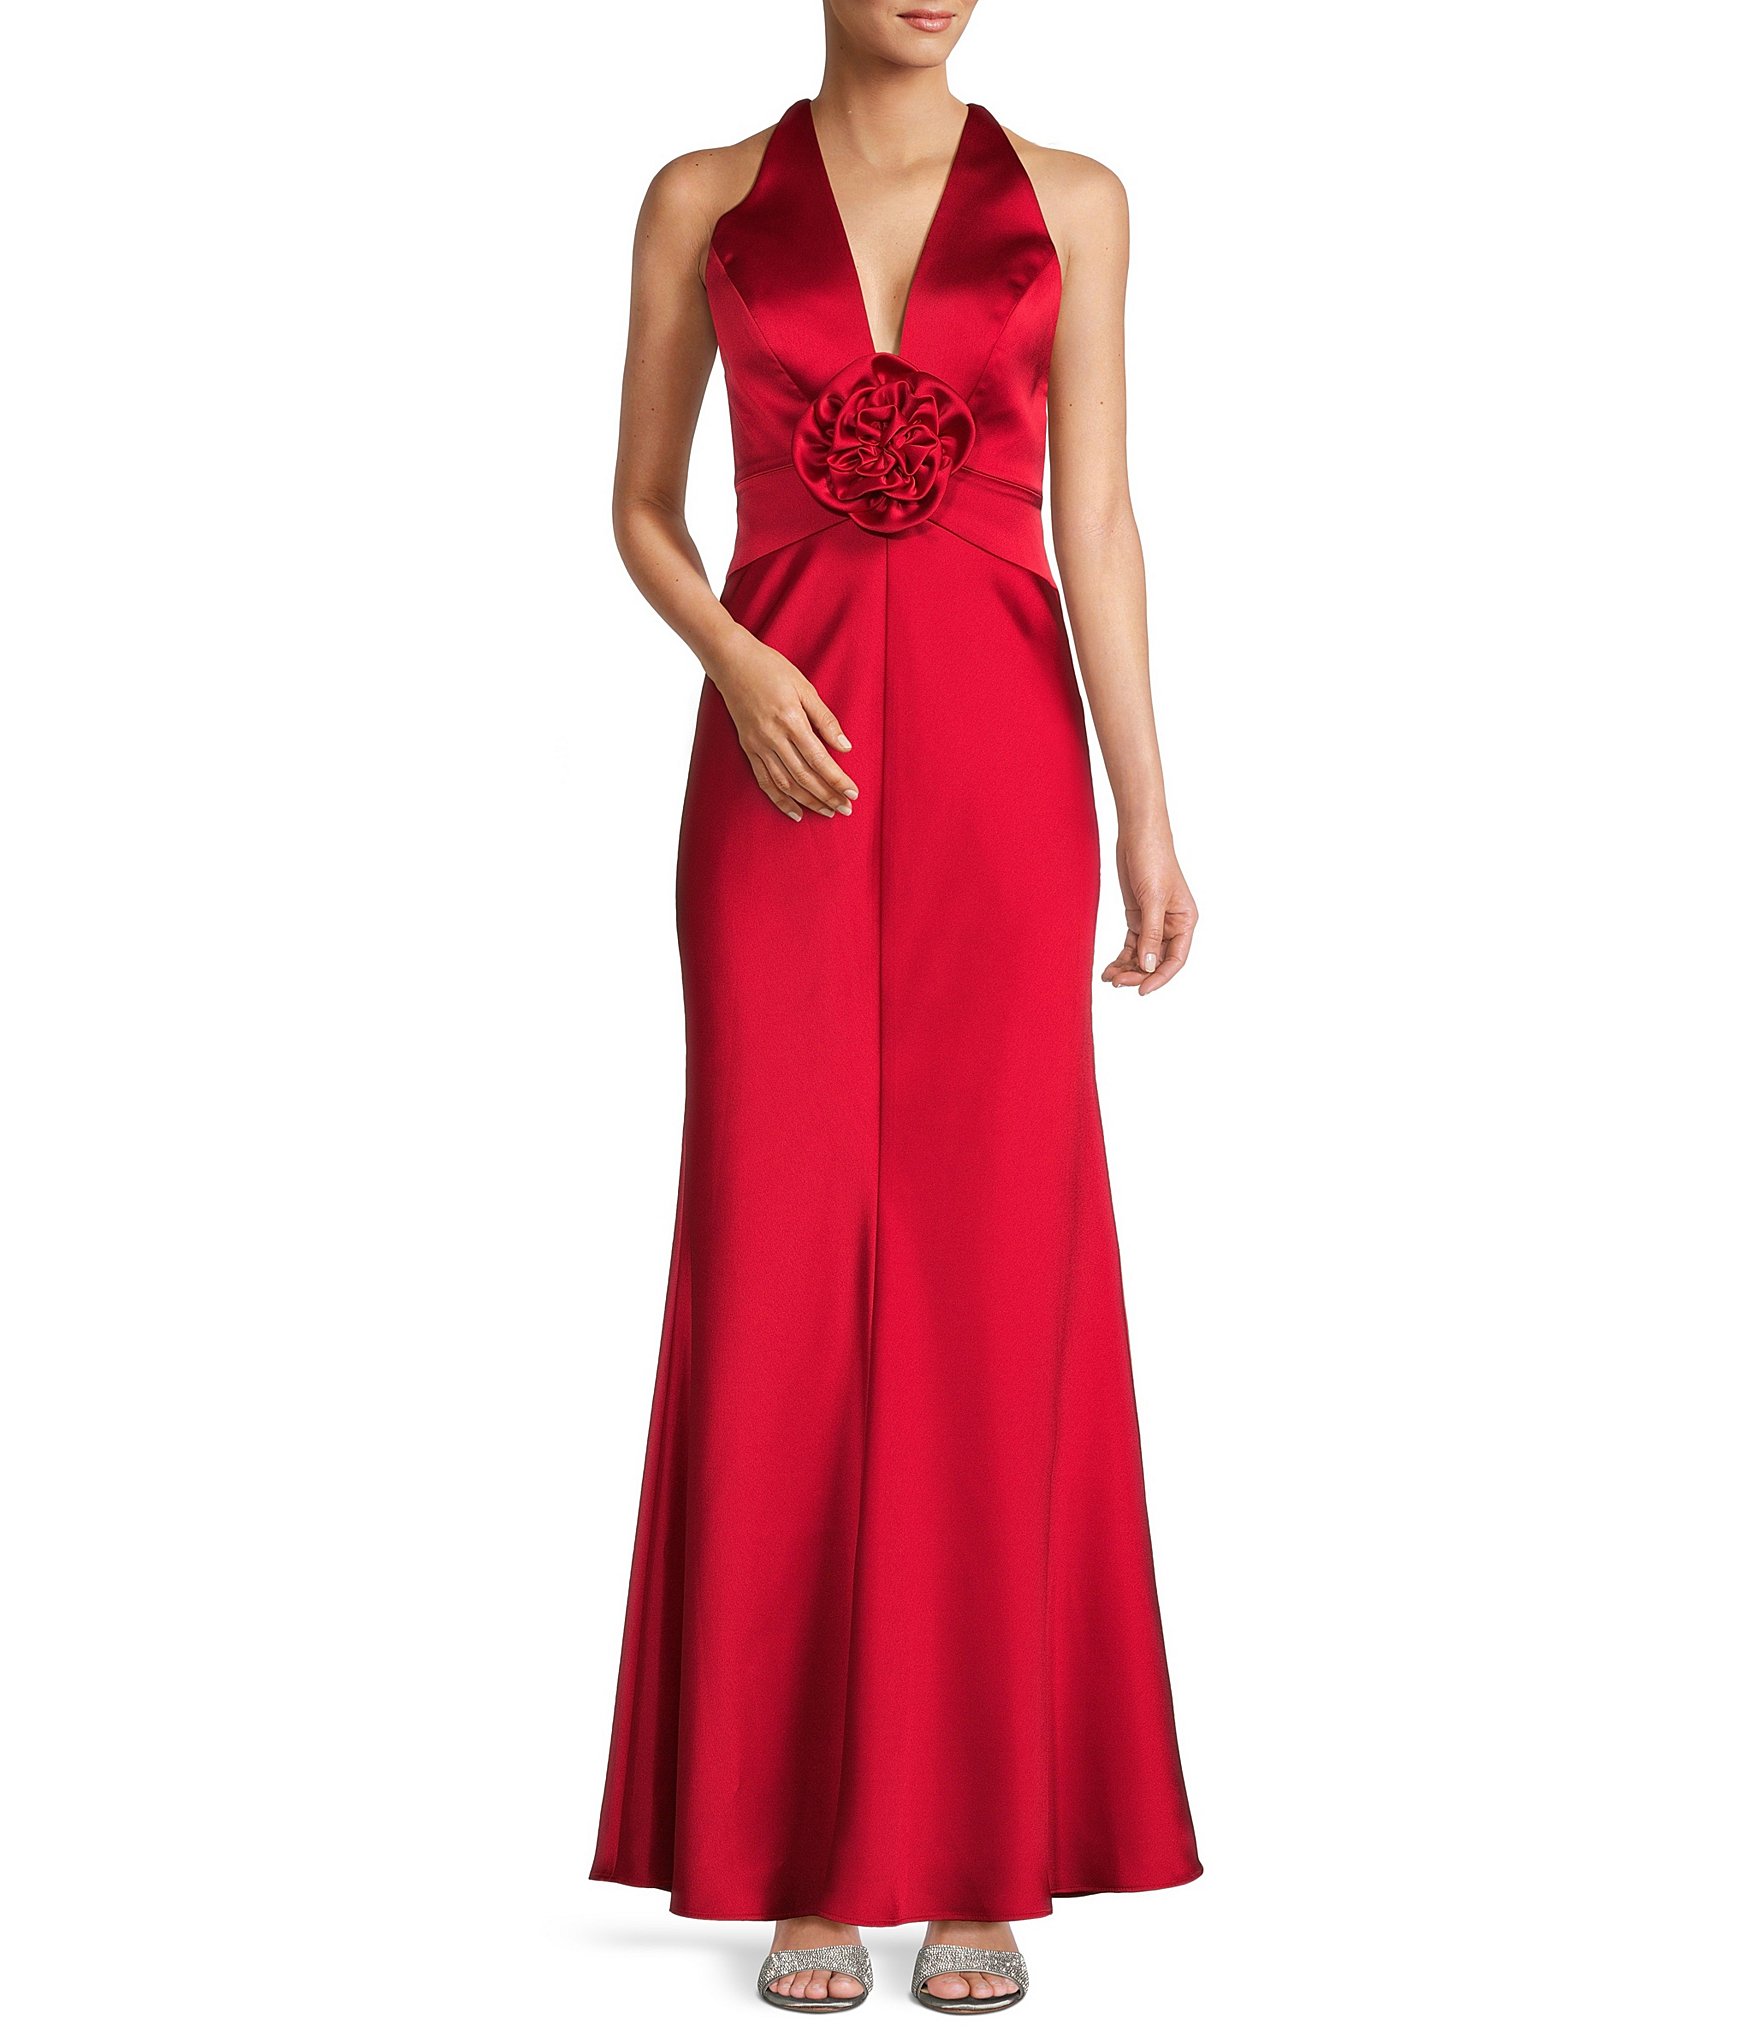 dresses with pockets: Women's Formal Dresses & Evening Gowns | Dillard's